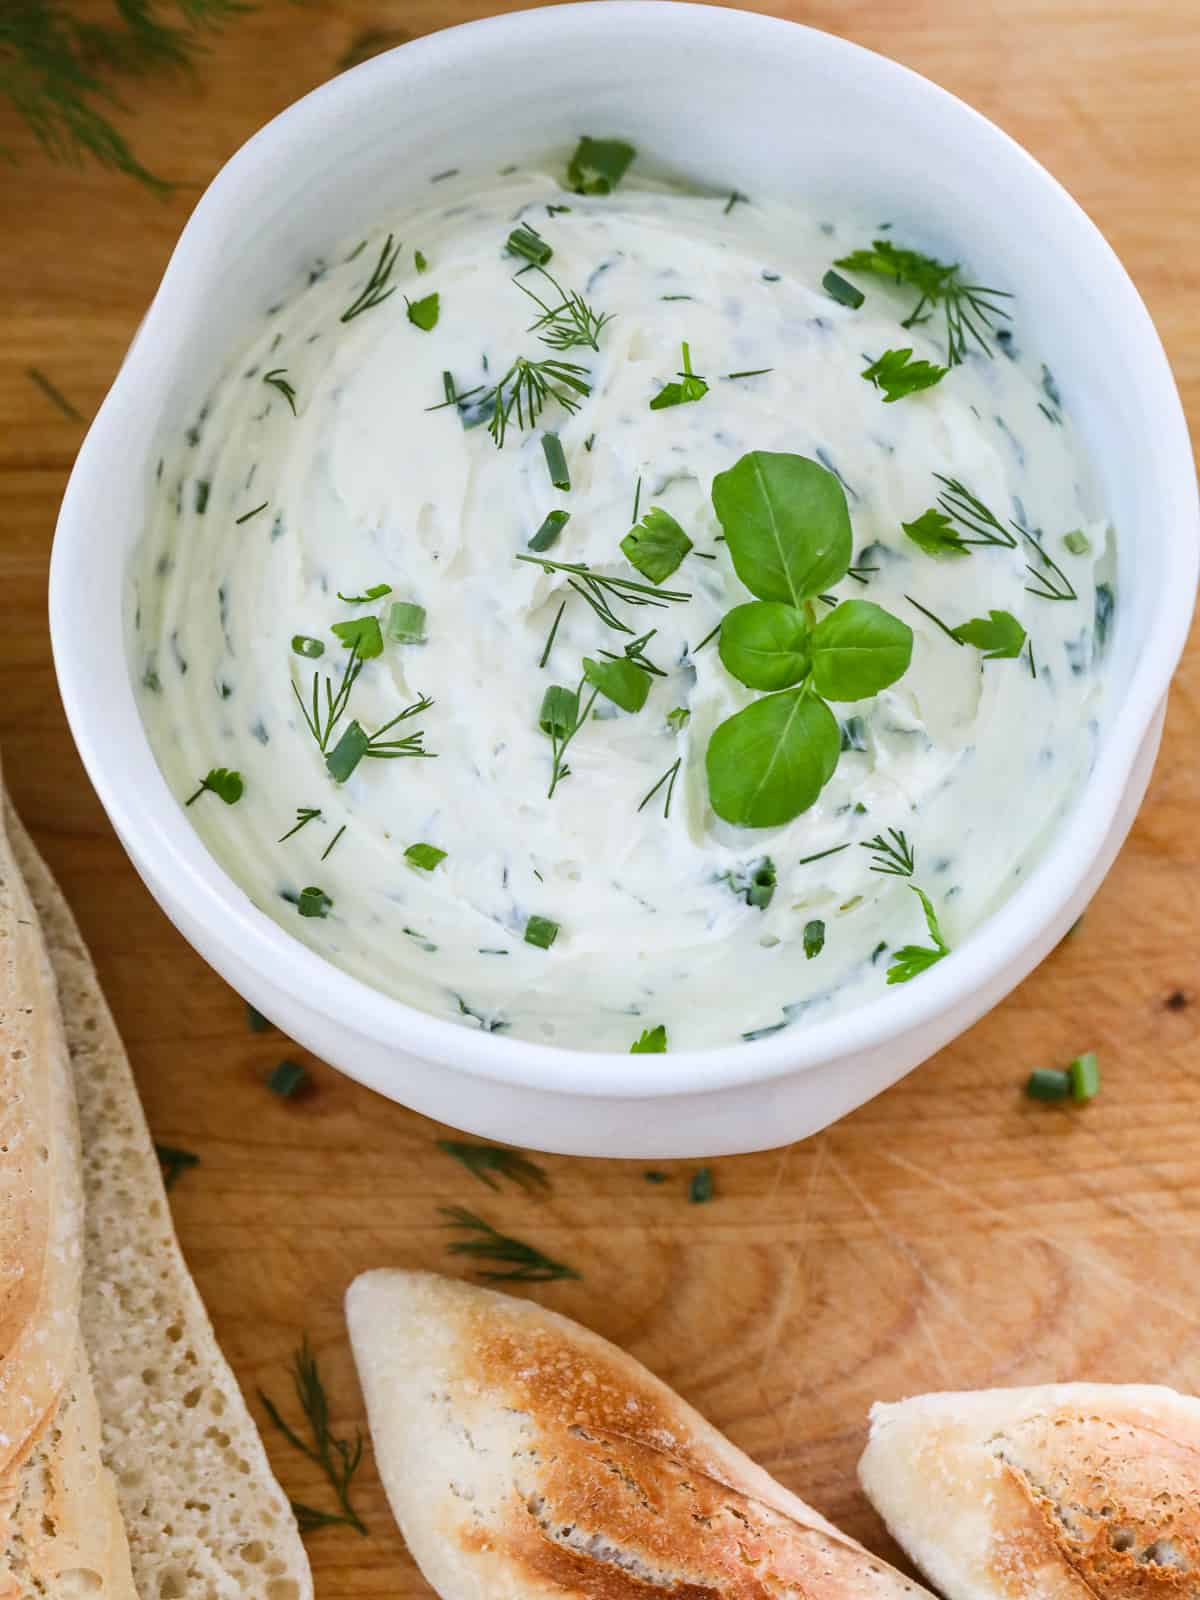 Close up of a white ceramic bowl filled with a white creamy herb dip garnished with fresh herbs.